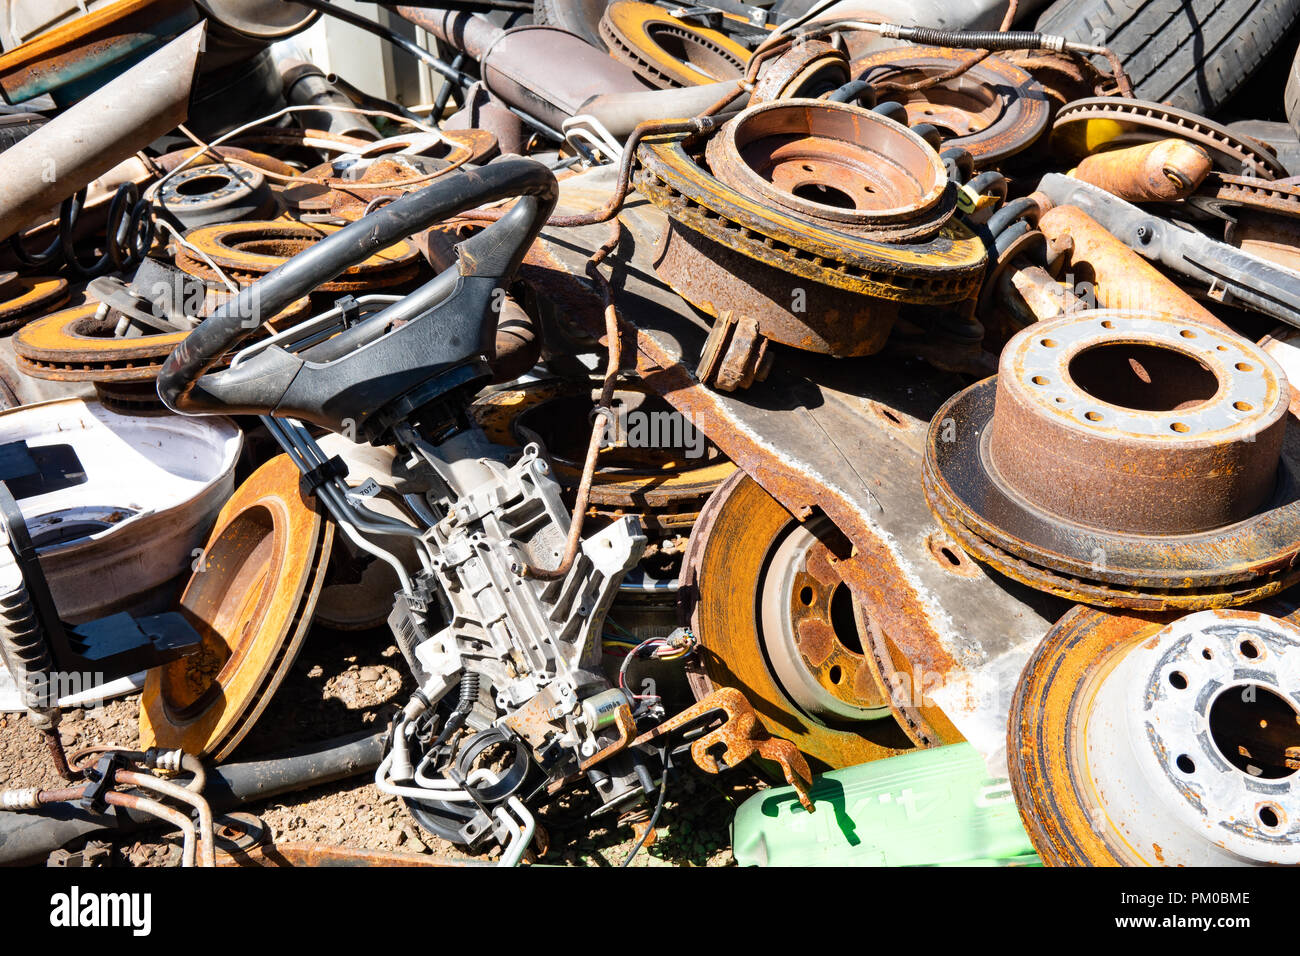 A pile of discarded used vehicle parts and tires for recycling in Upstate New York, USA. Stock Photo